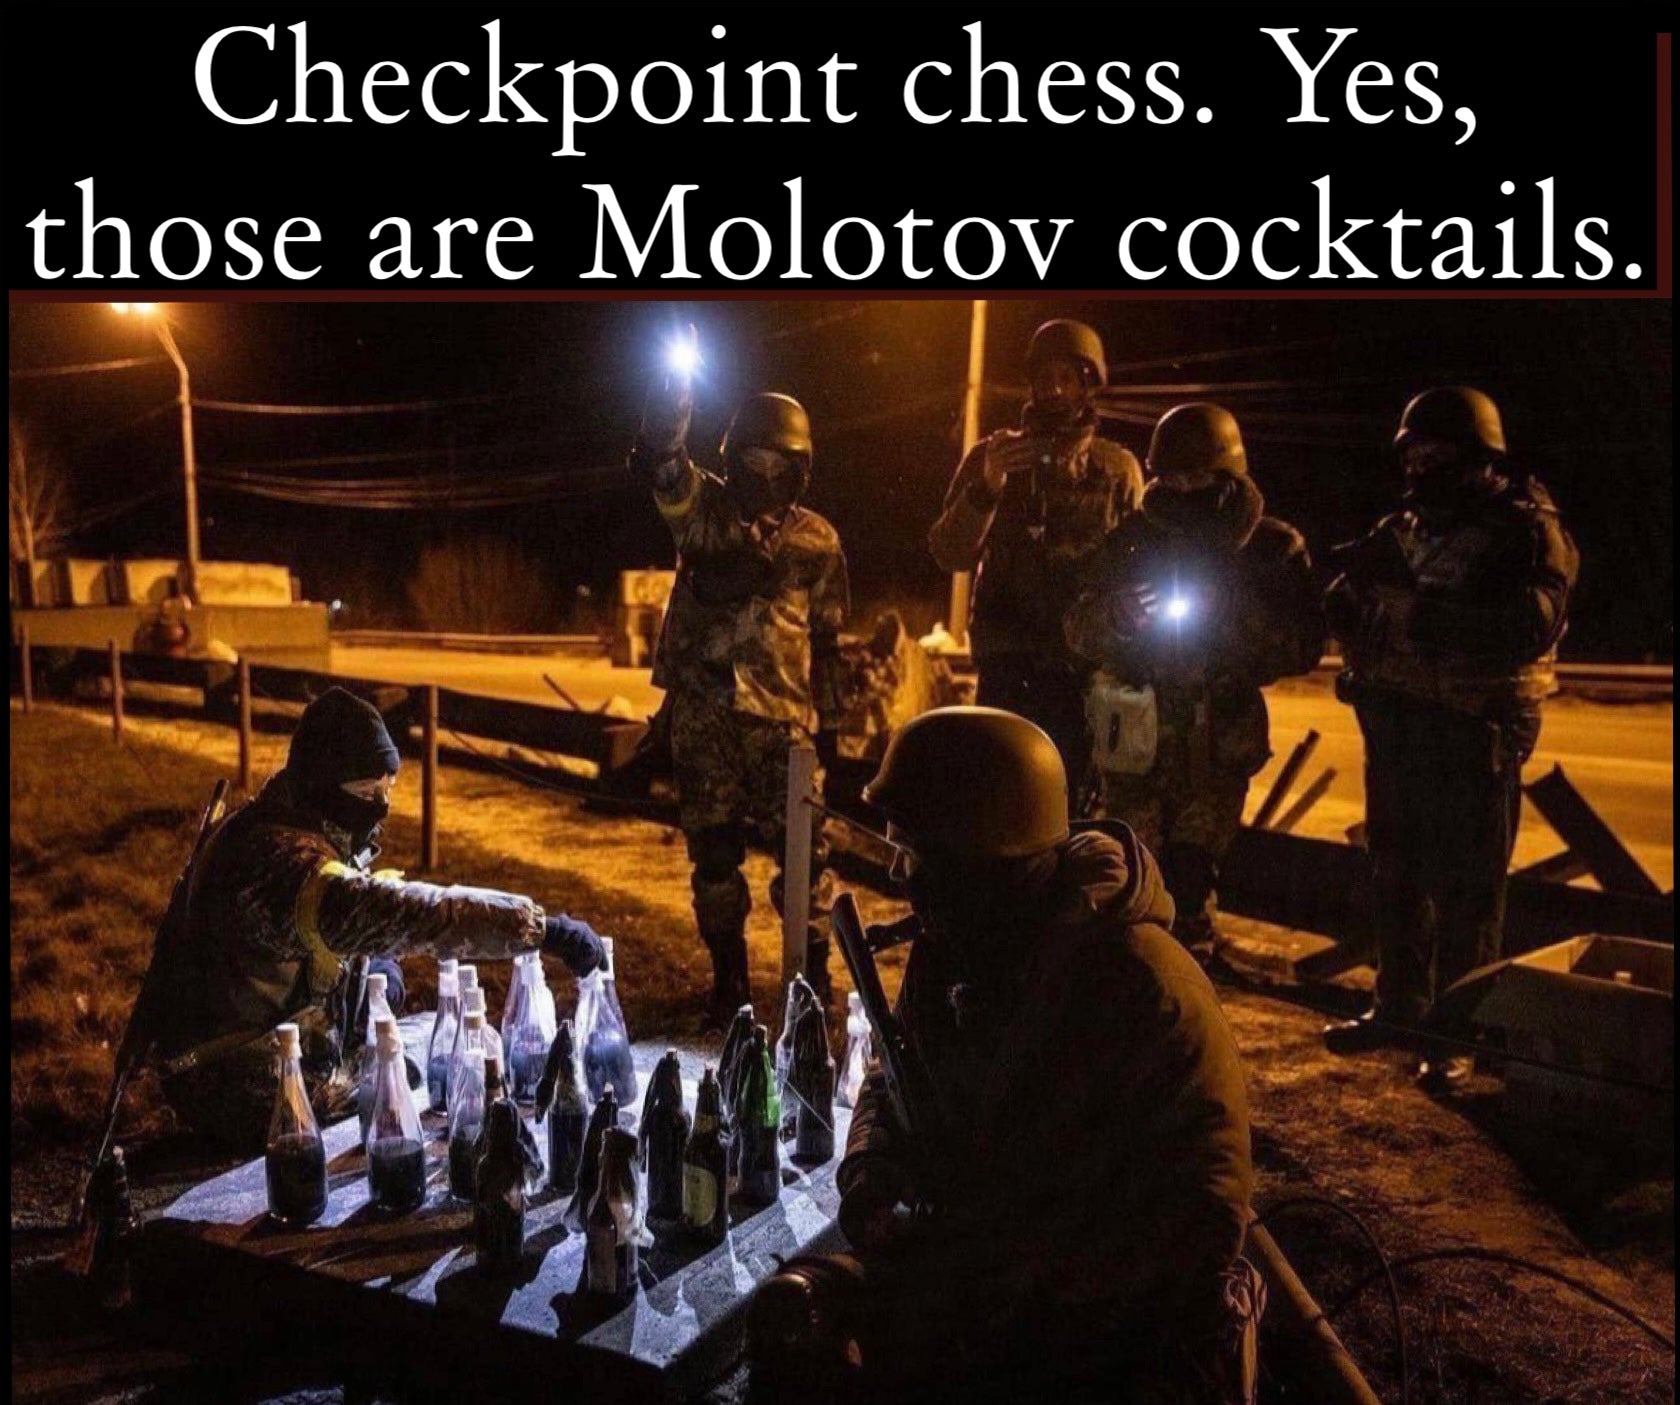 Checkpoint Chess. Molotov cocktails